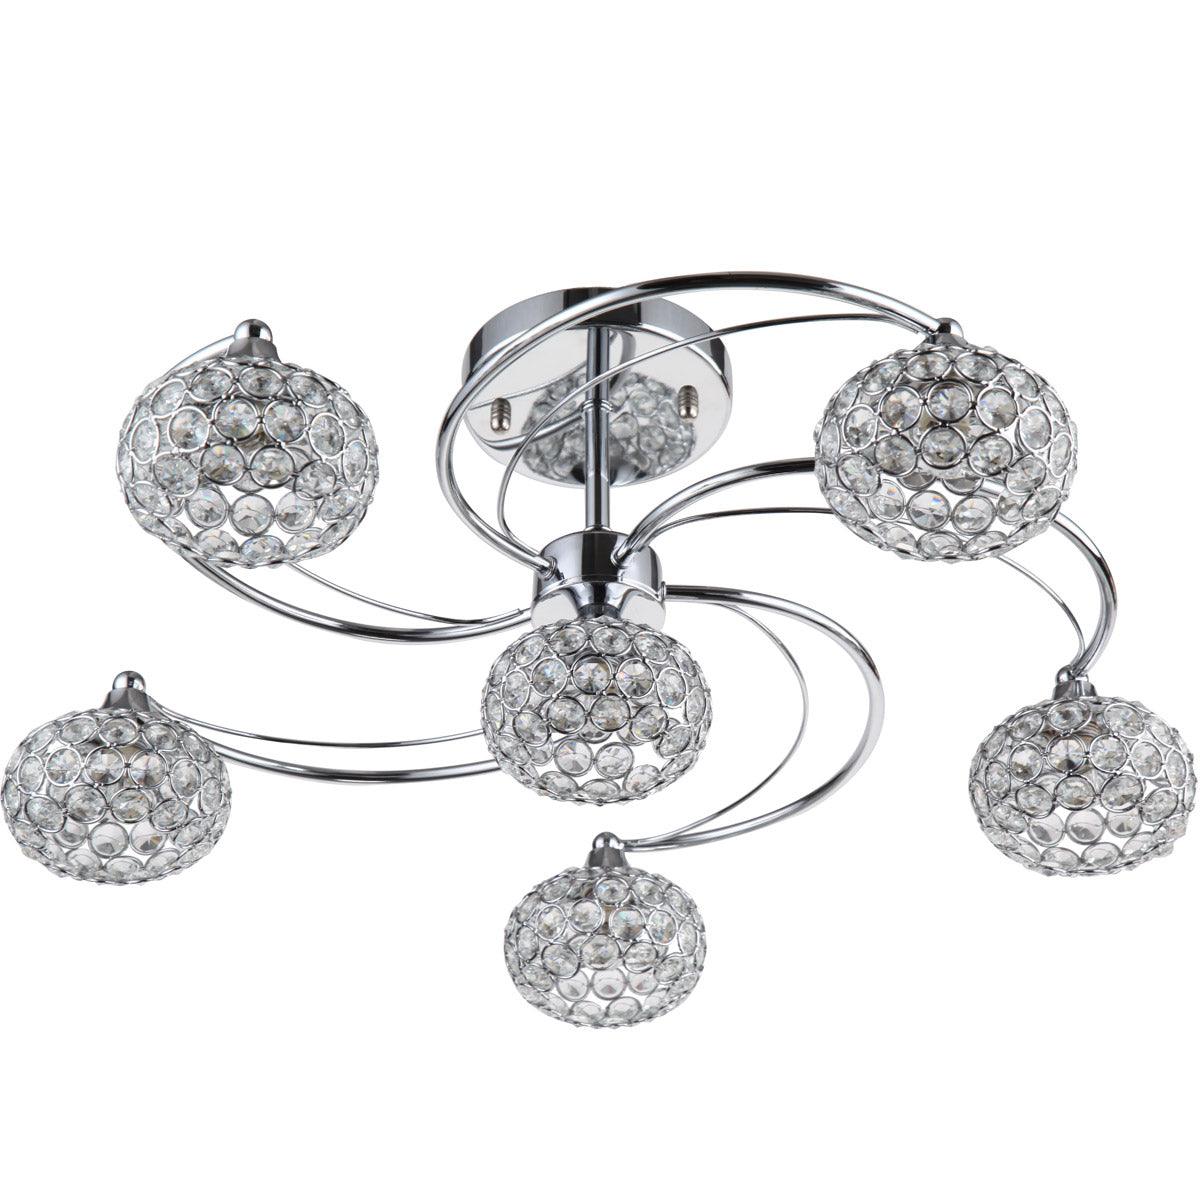 Chrome Curve Arms with Clear Crystal Globe Shade Flush Mount - LV LIGHTING